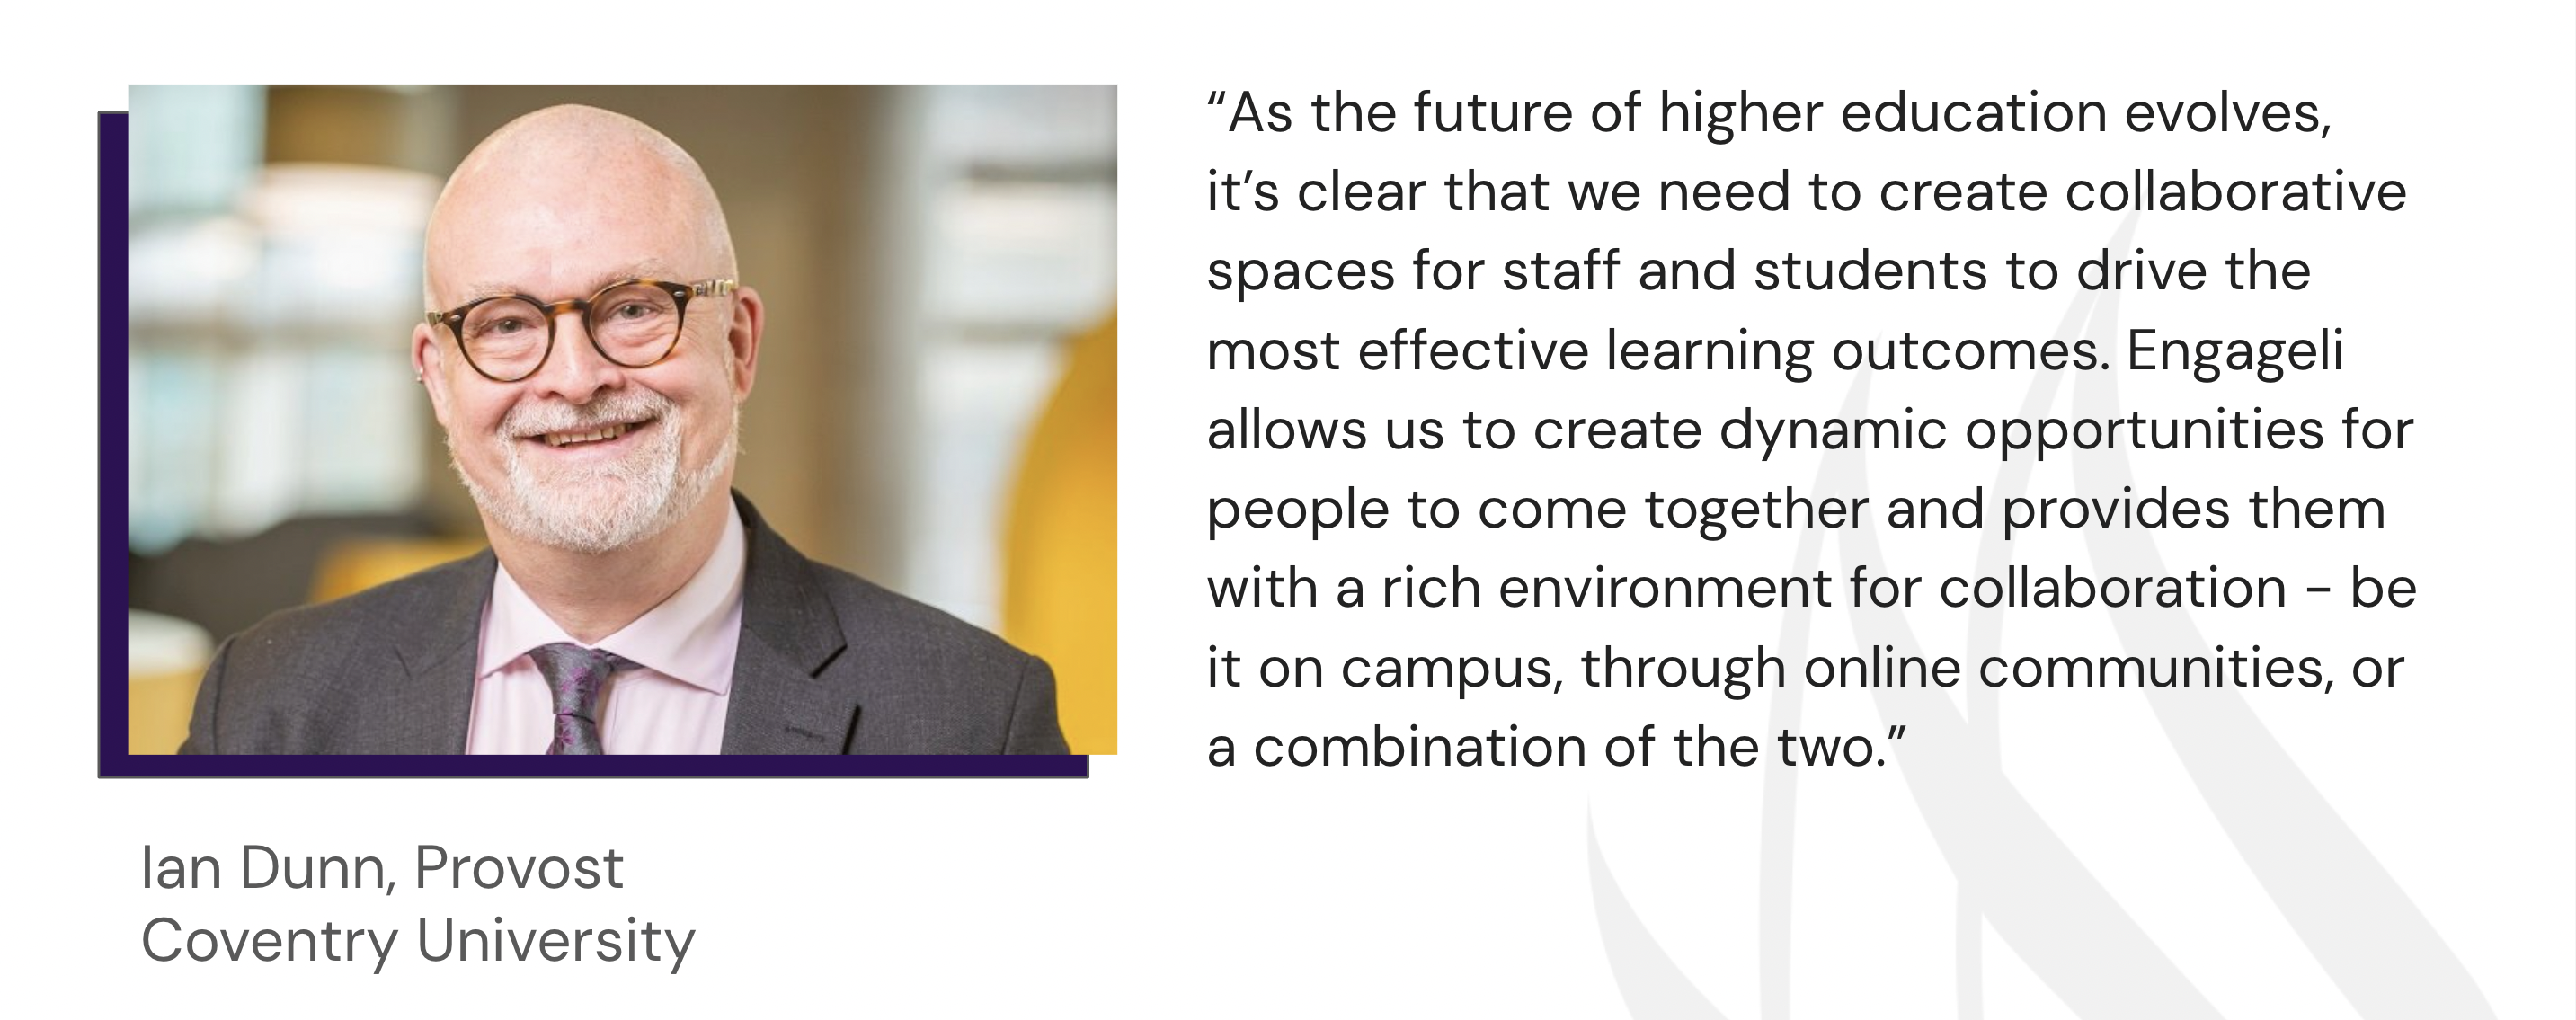 Quote by Ian Dunn, Provost of Coventry University: “As the future of higher education evolves, it’s clear that we need to create collaborative spaces for staff and students to drive the most effective learning outcomes. Engageli allows us to create dynamic opportunities for people to come together and provides them with a rich environment for collaboration - be it on campus, through online communities, or a combination of the two."